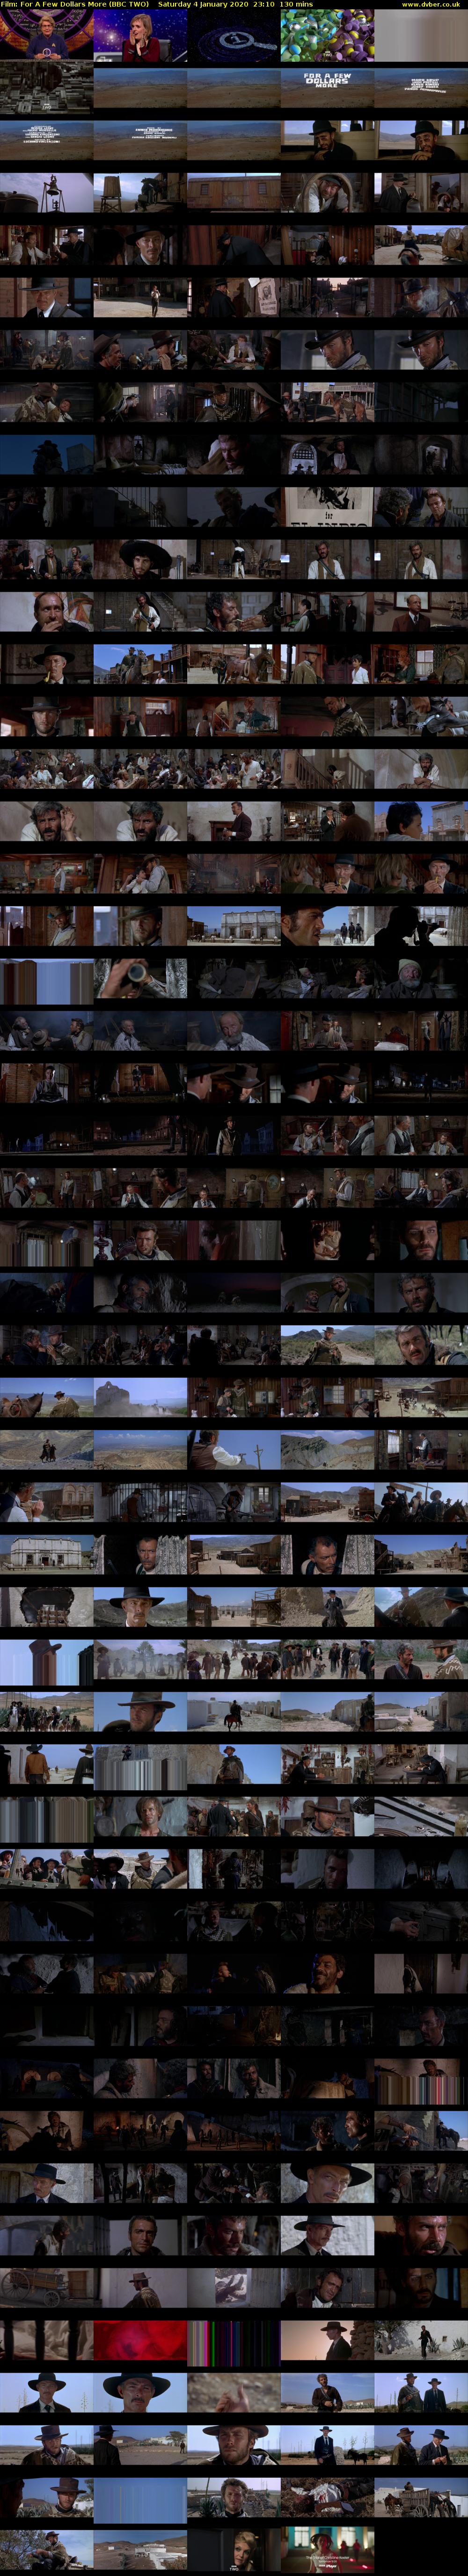 Film: For A Few Dollars More (BBC TWO) Saturday 4 January 2020 23:10 - 01:20